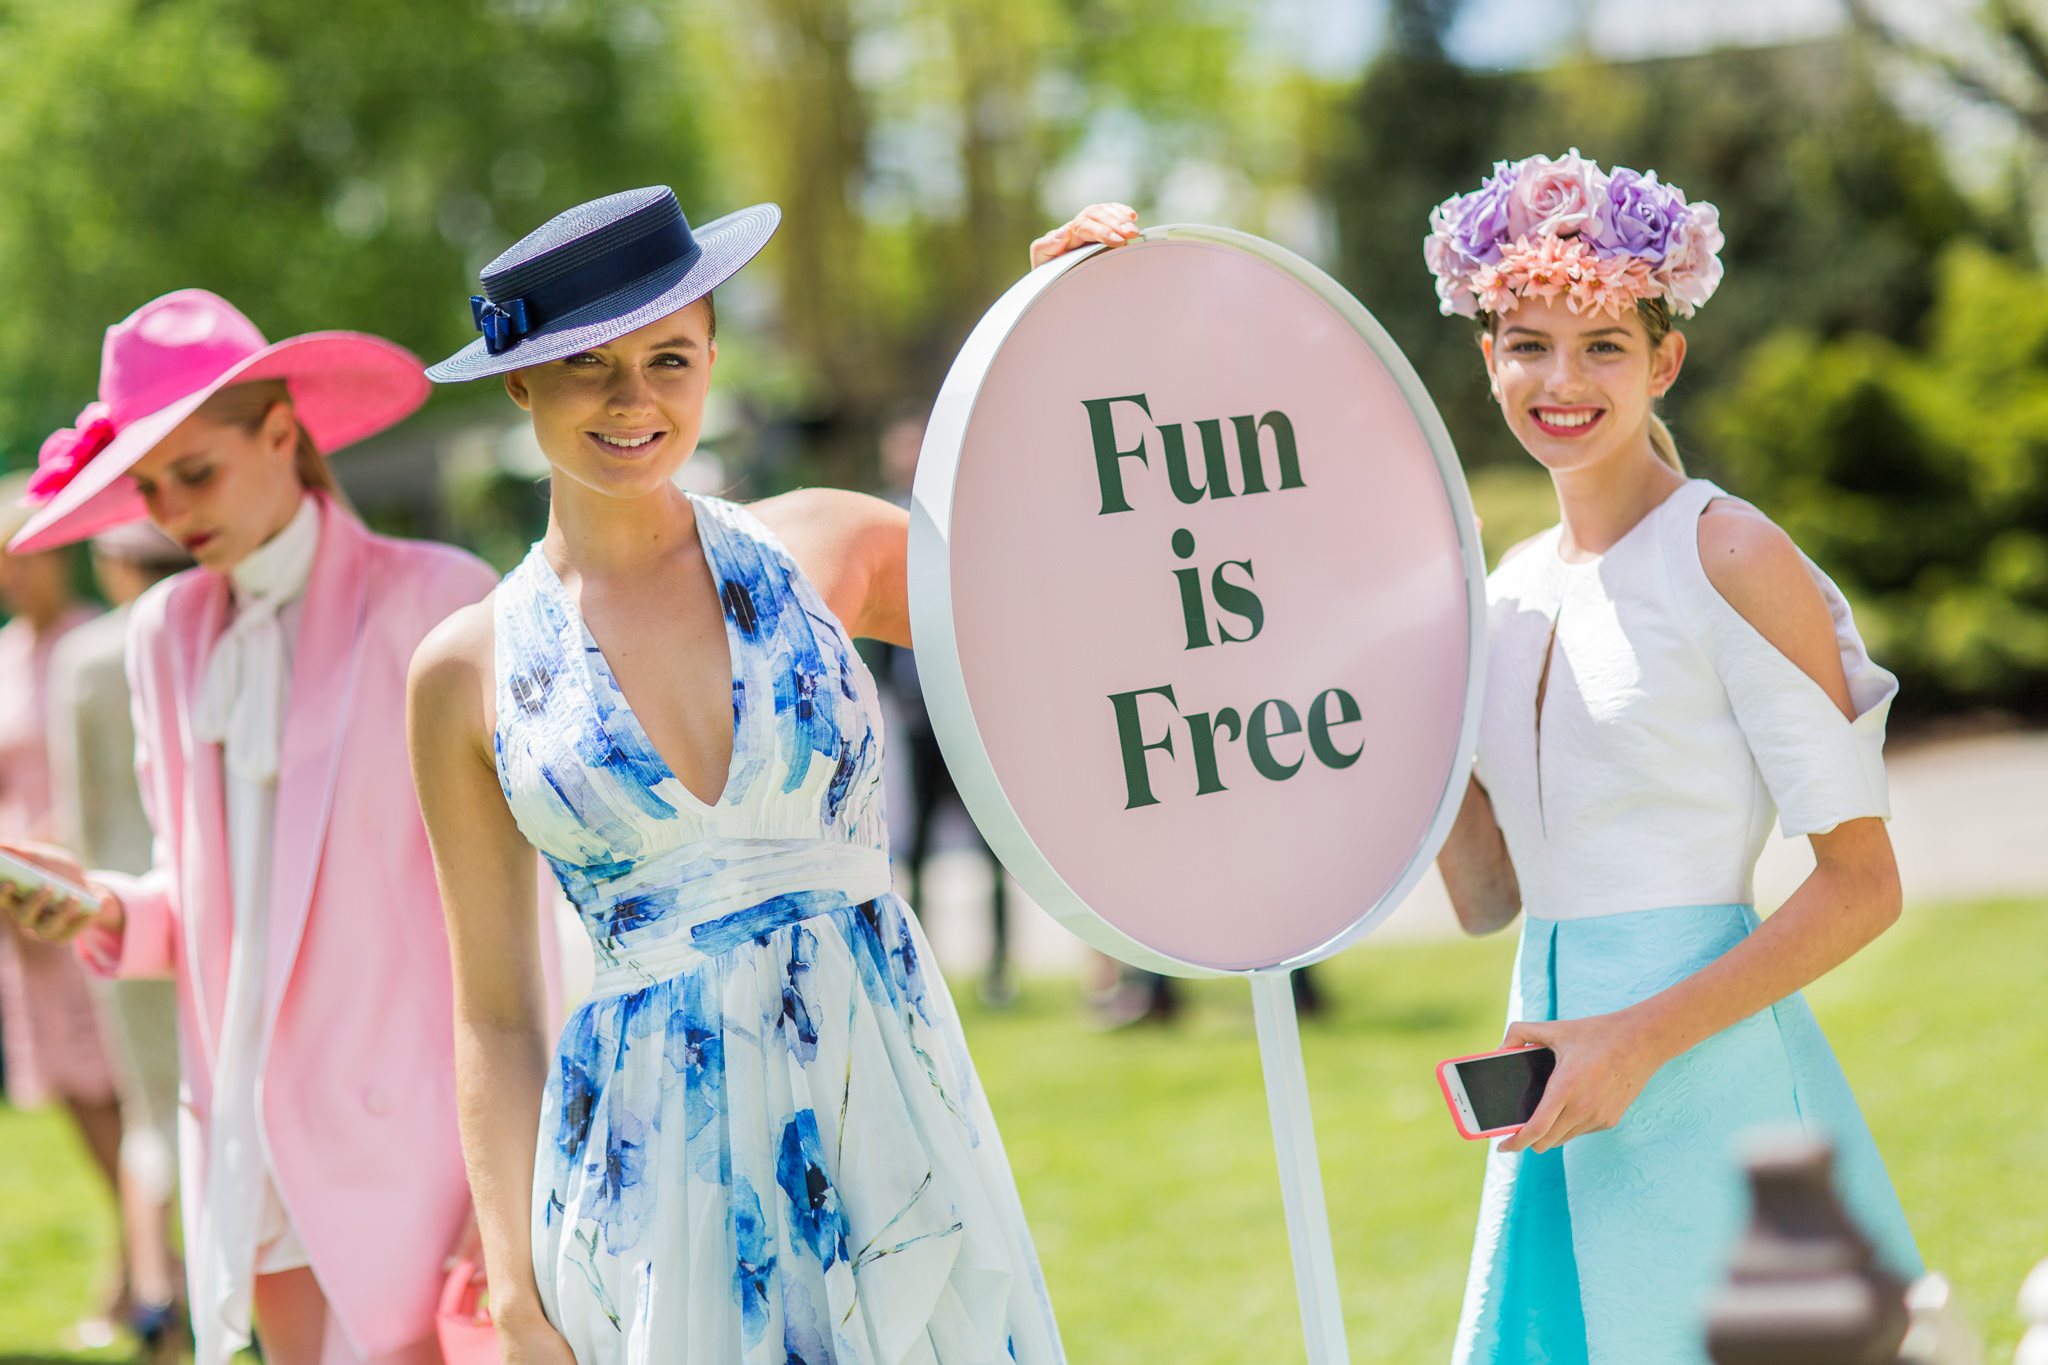 fun is free - melbourne cup fashion models